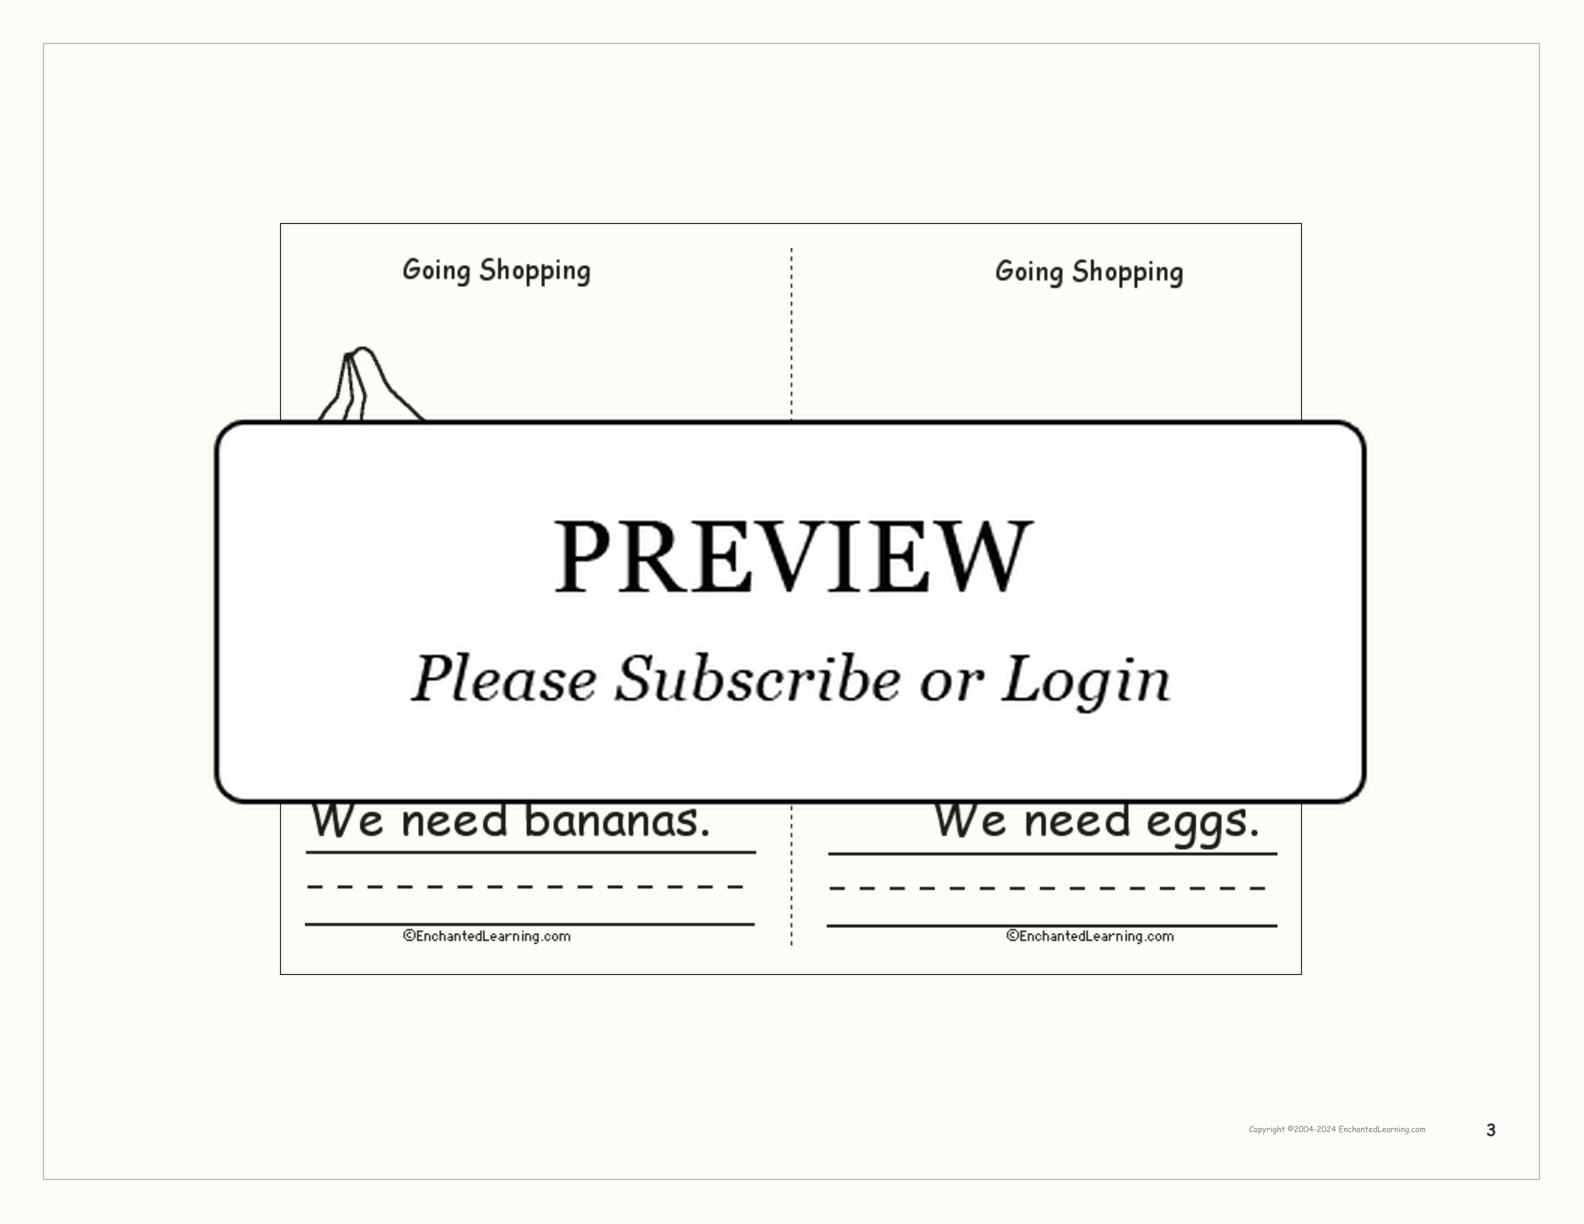 Going Shopping Book interactive printout page 3